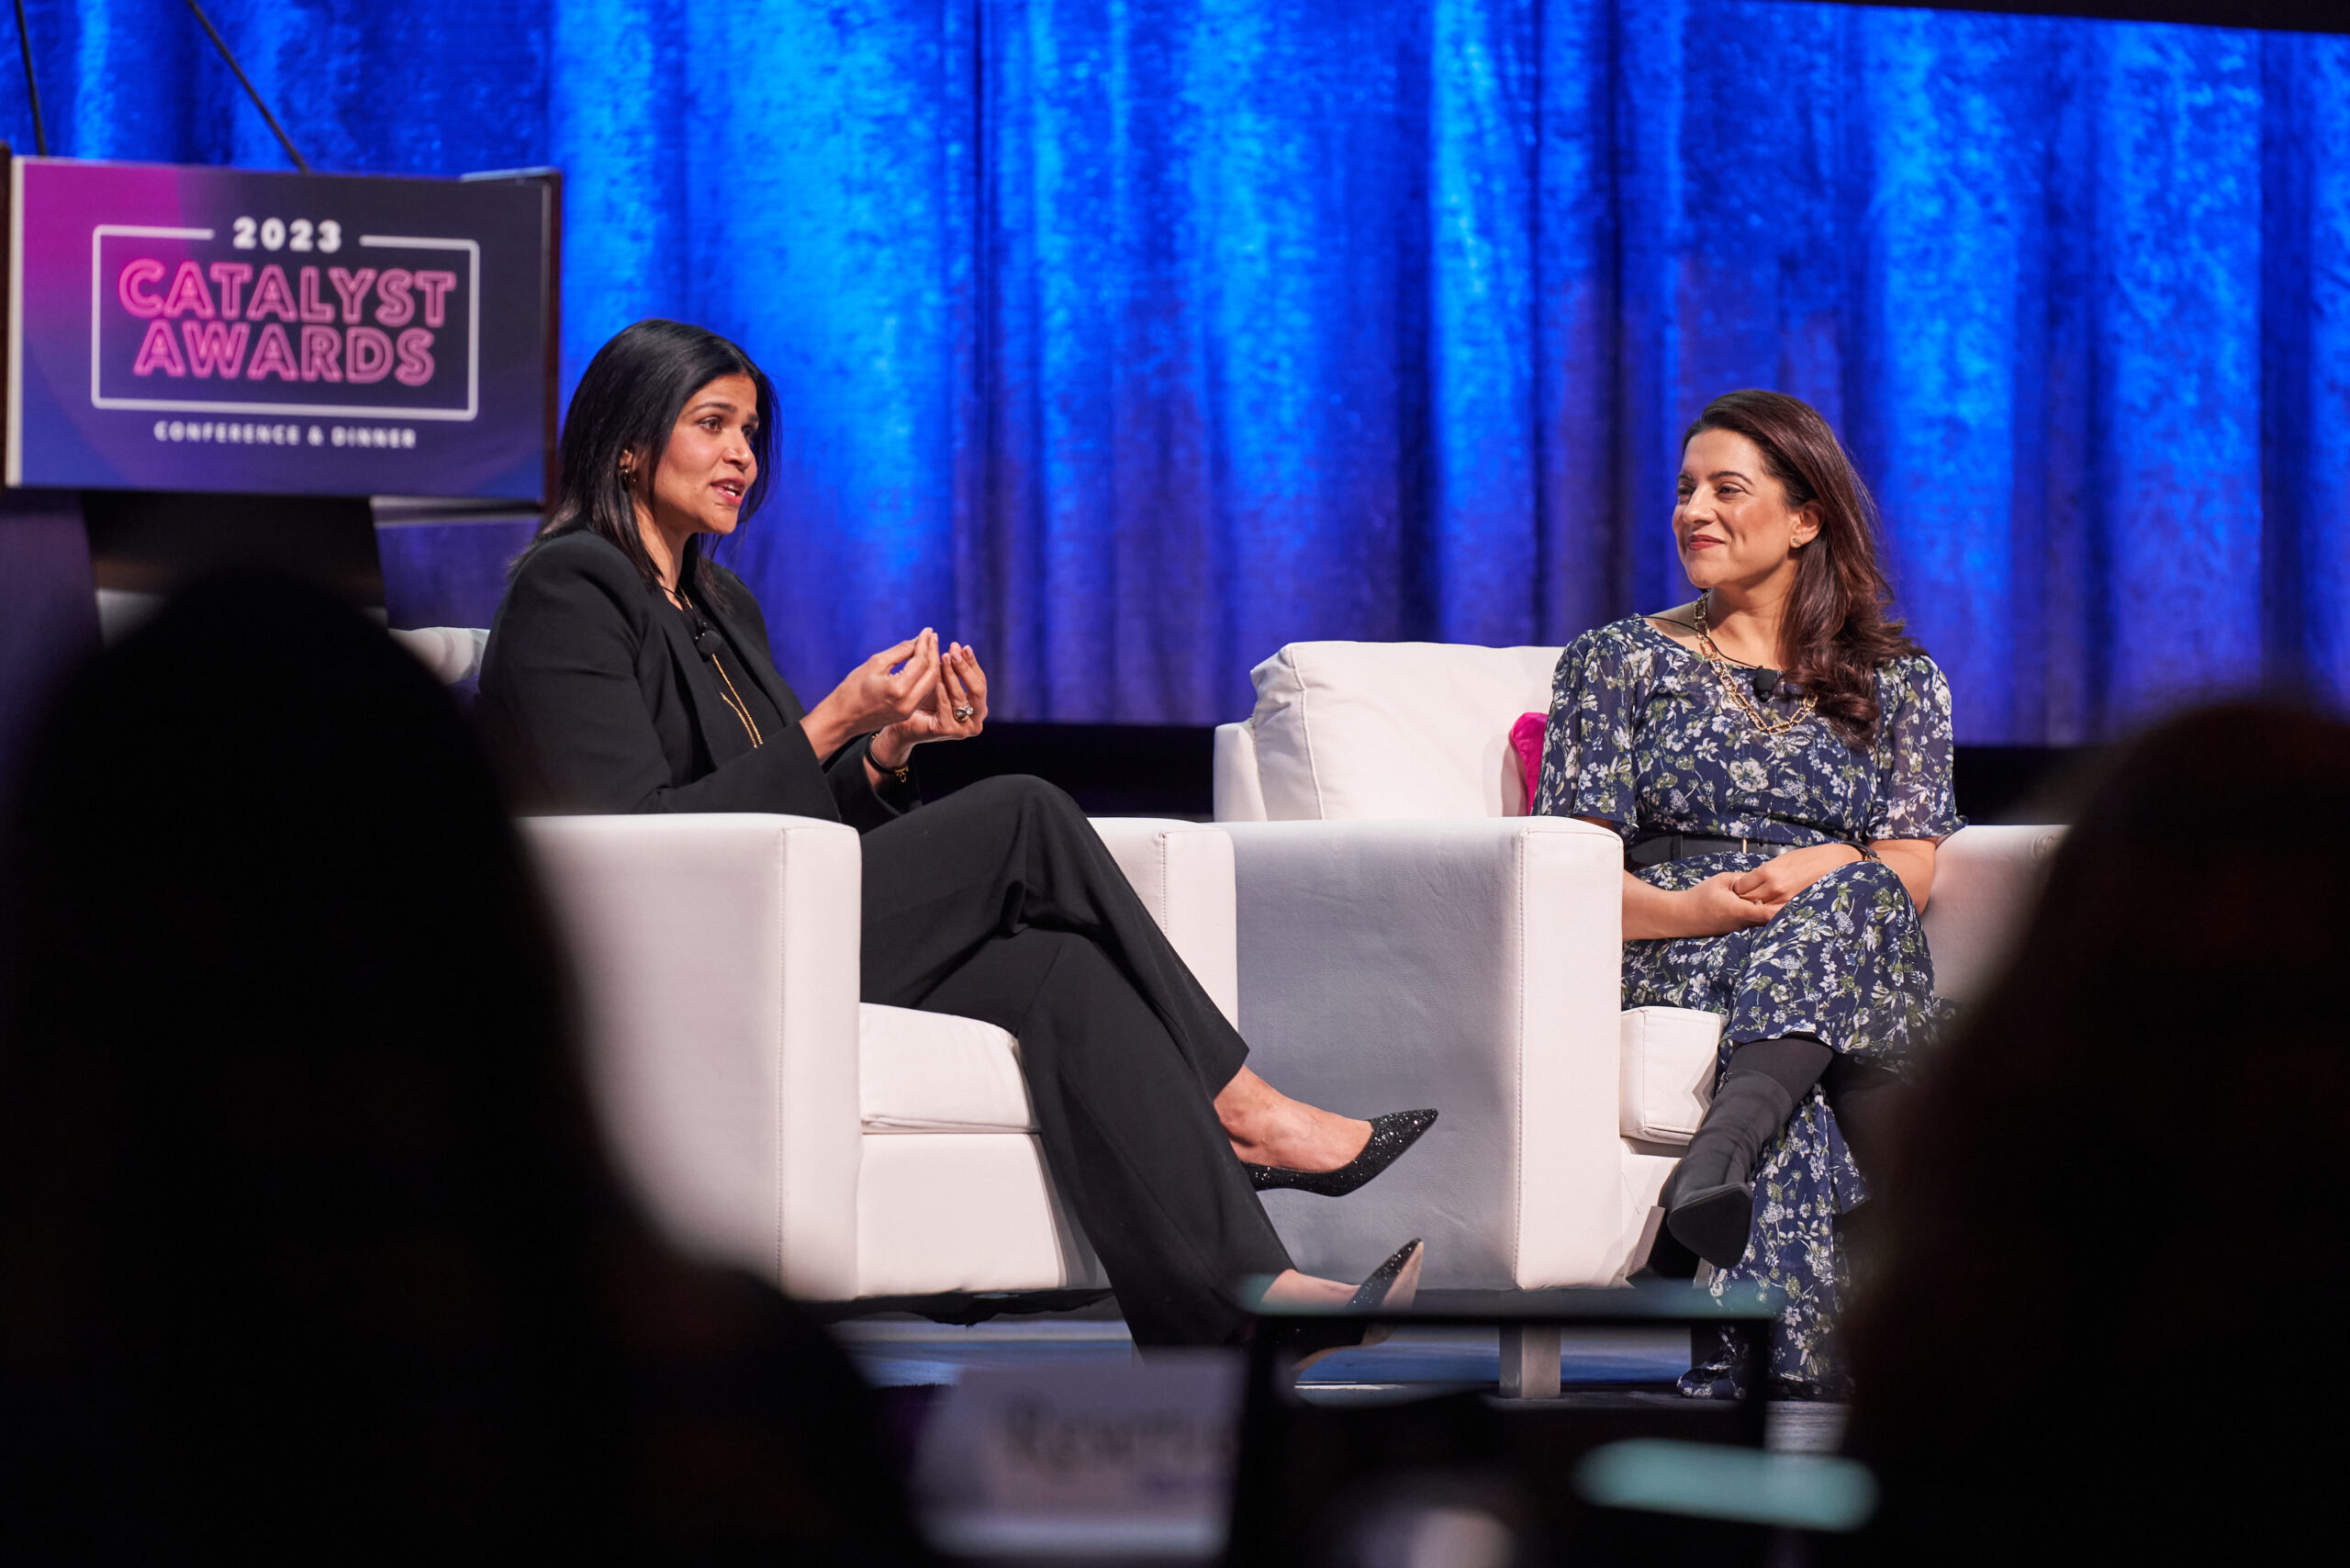 From left: Shim Sameer, Head of Preferred Business and Lending, Bank of America; Reshma Saujani, Founder and CEO, Moms First, Founder, Girls Who Code.